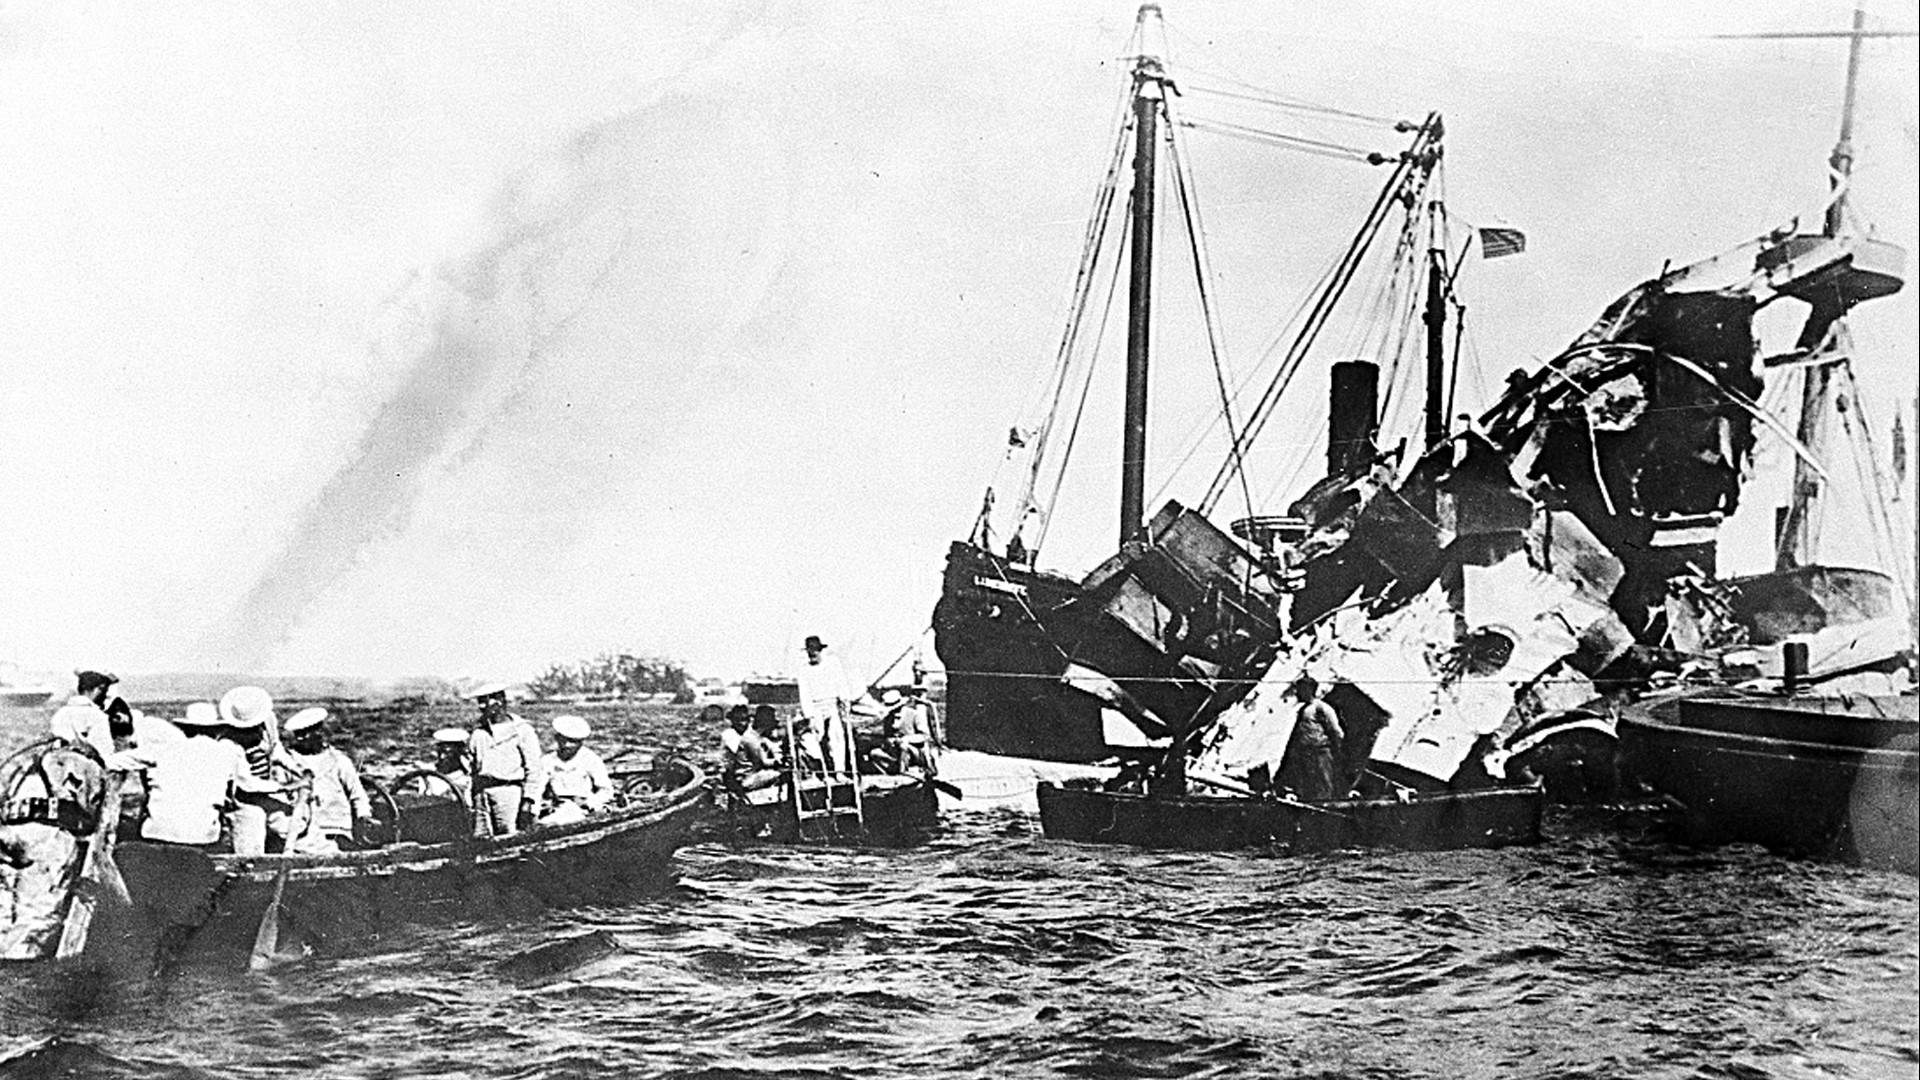 The Spanish-American War battle cry of "Remember the Maine" gained new currency with the discovery of the ship's wreckage off the coast of Cuba in November 2000.